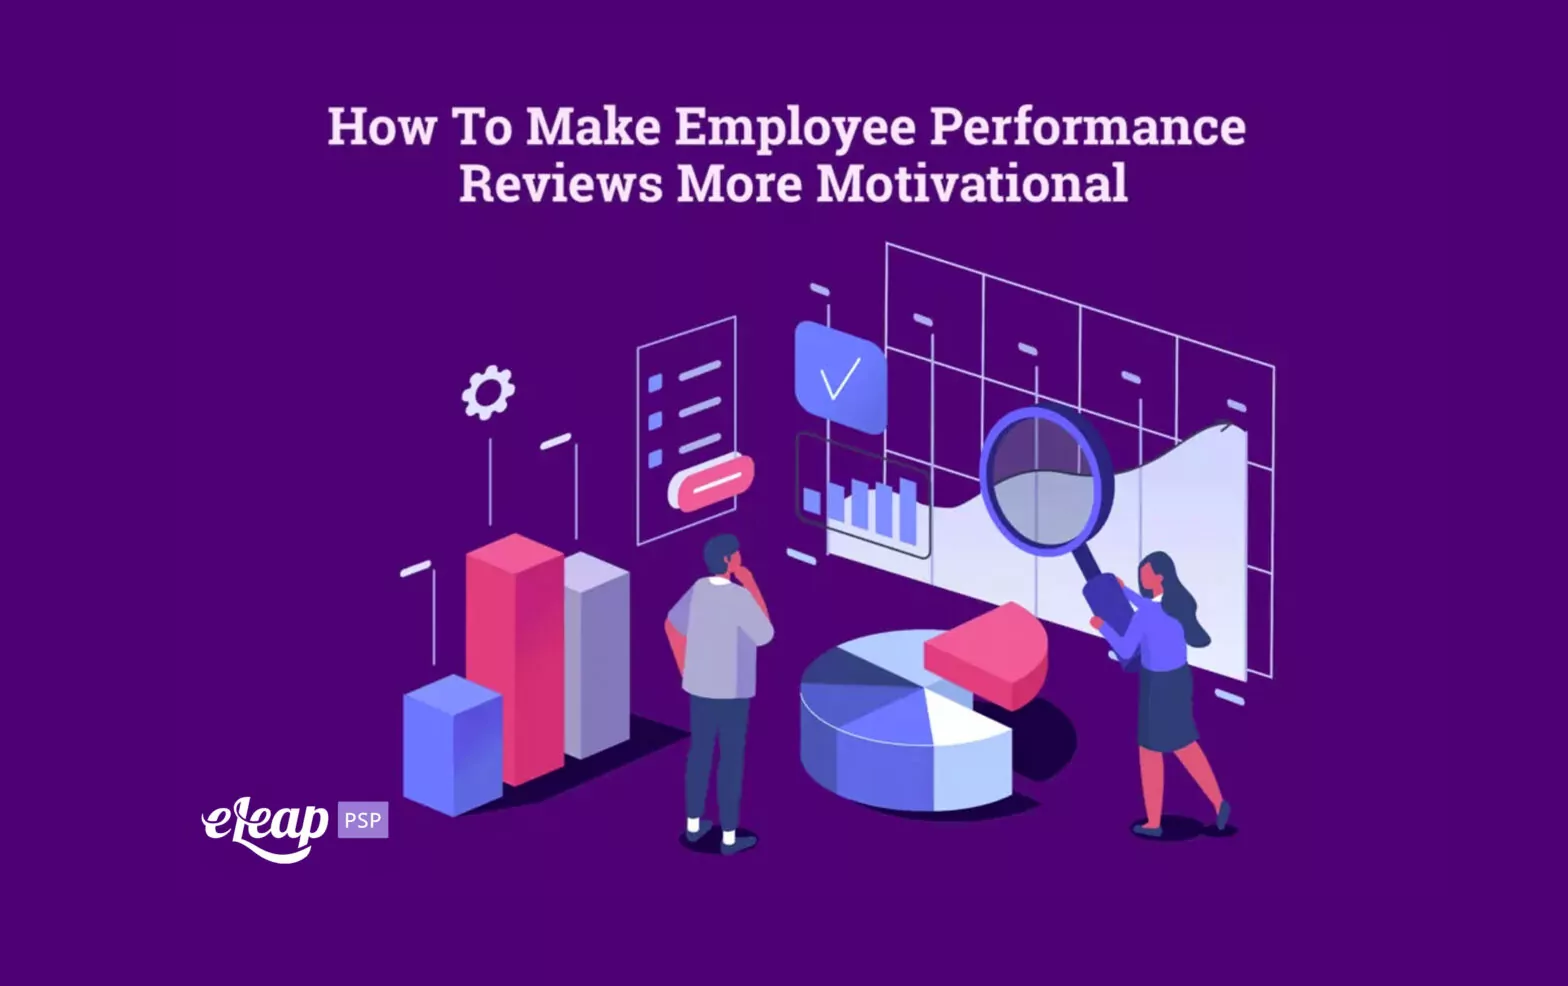 How To Make Employee Performance Reviews More Motivational